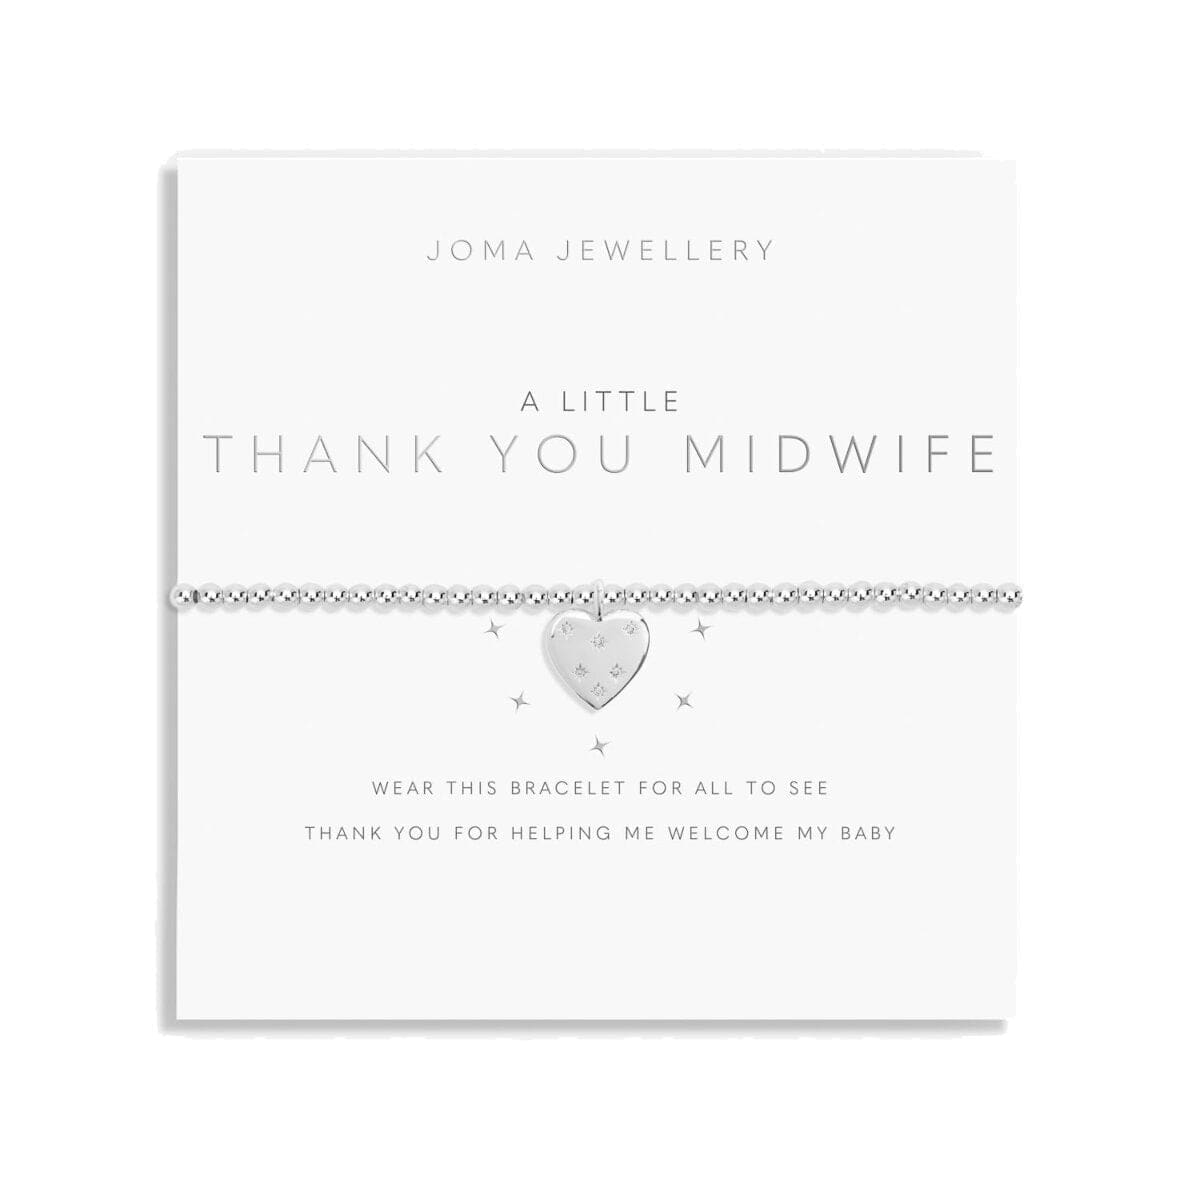 Joma Jewellery Bracelet Joma Jewellery Bracelet - A Little Thank You Midwife